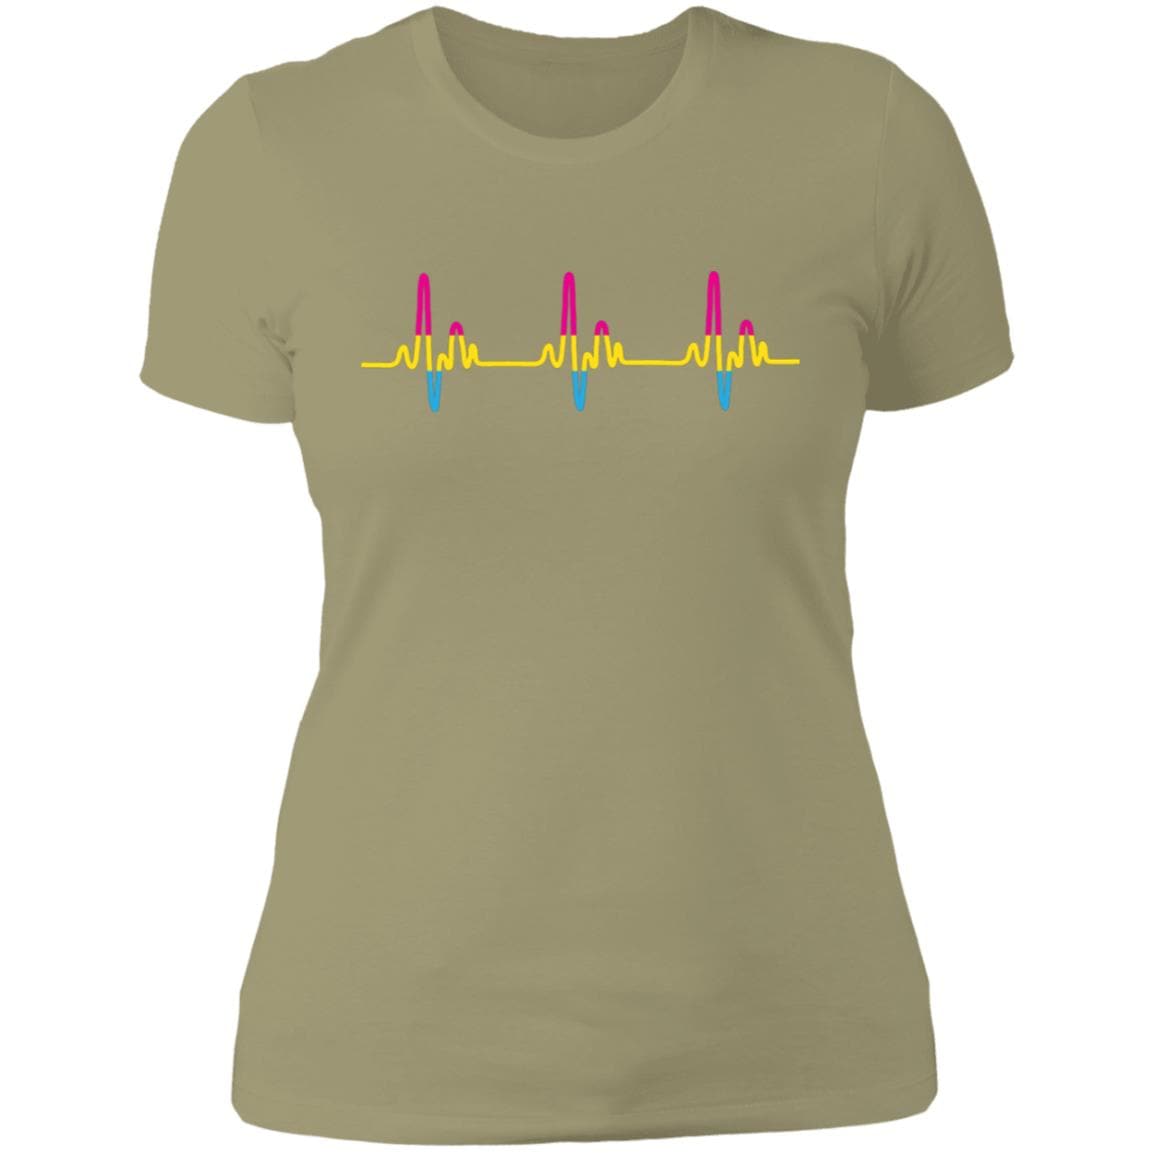 Pansexual Heartbeat Shirt - PrideBooth